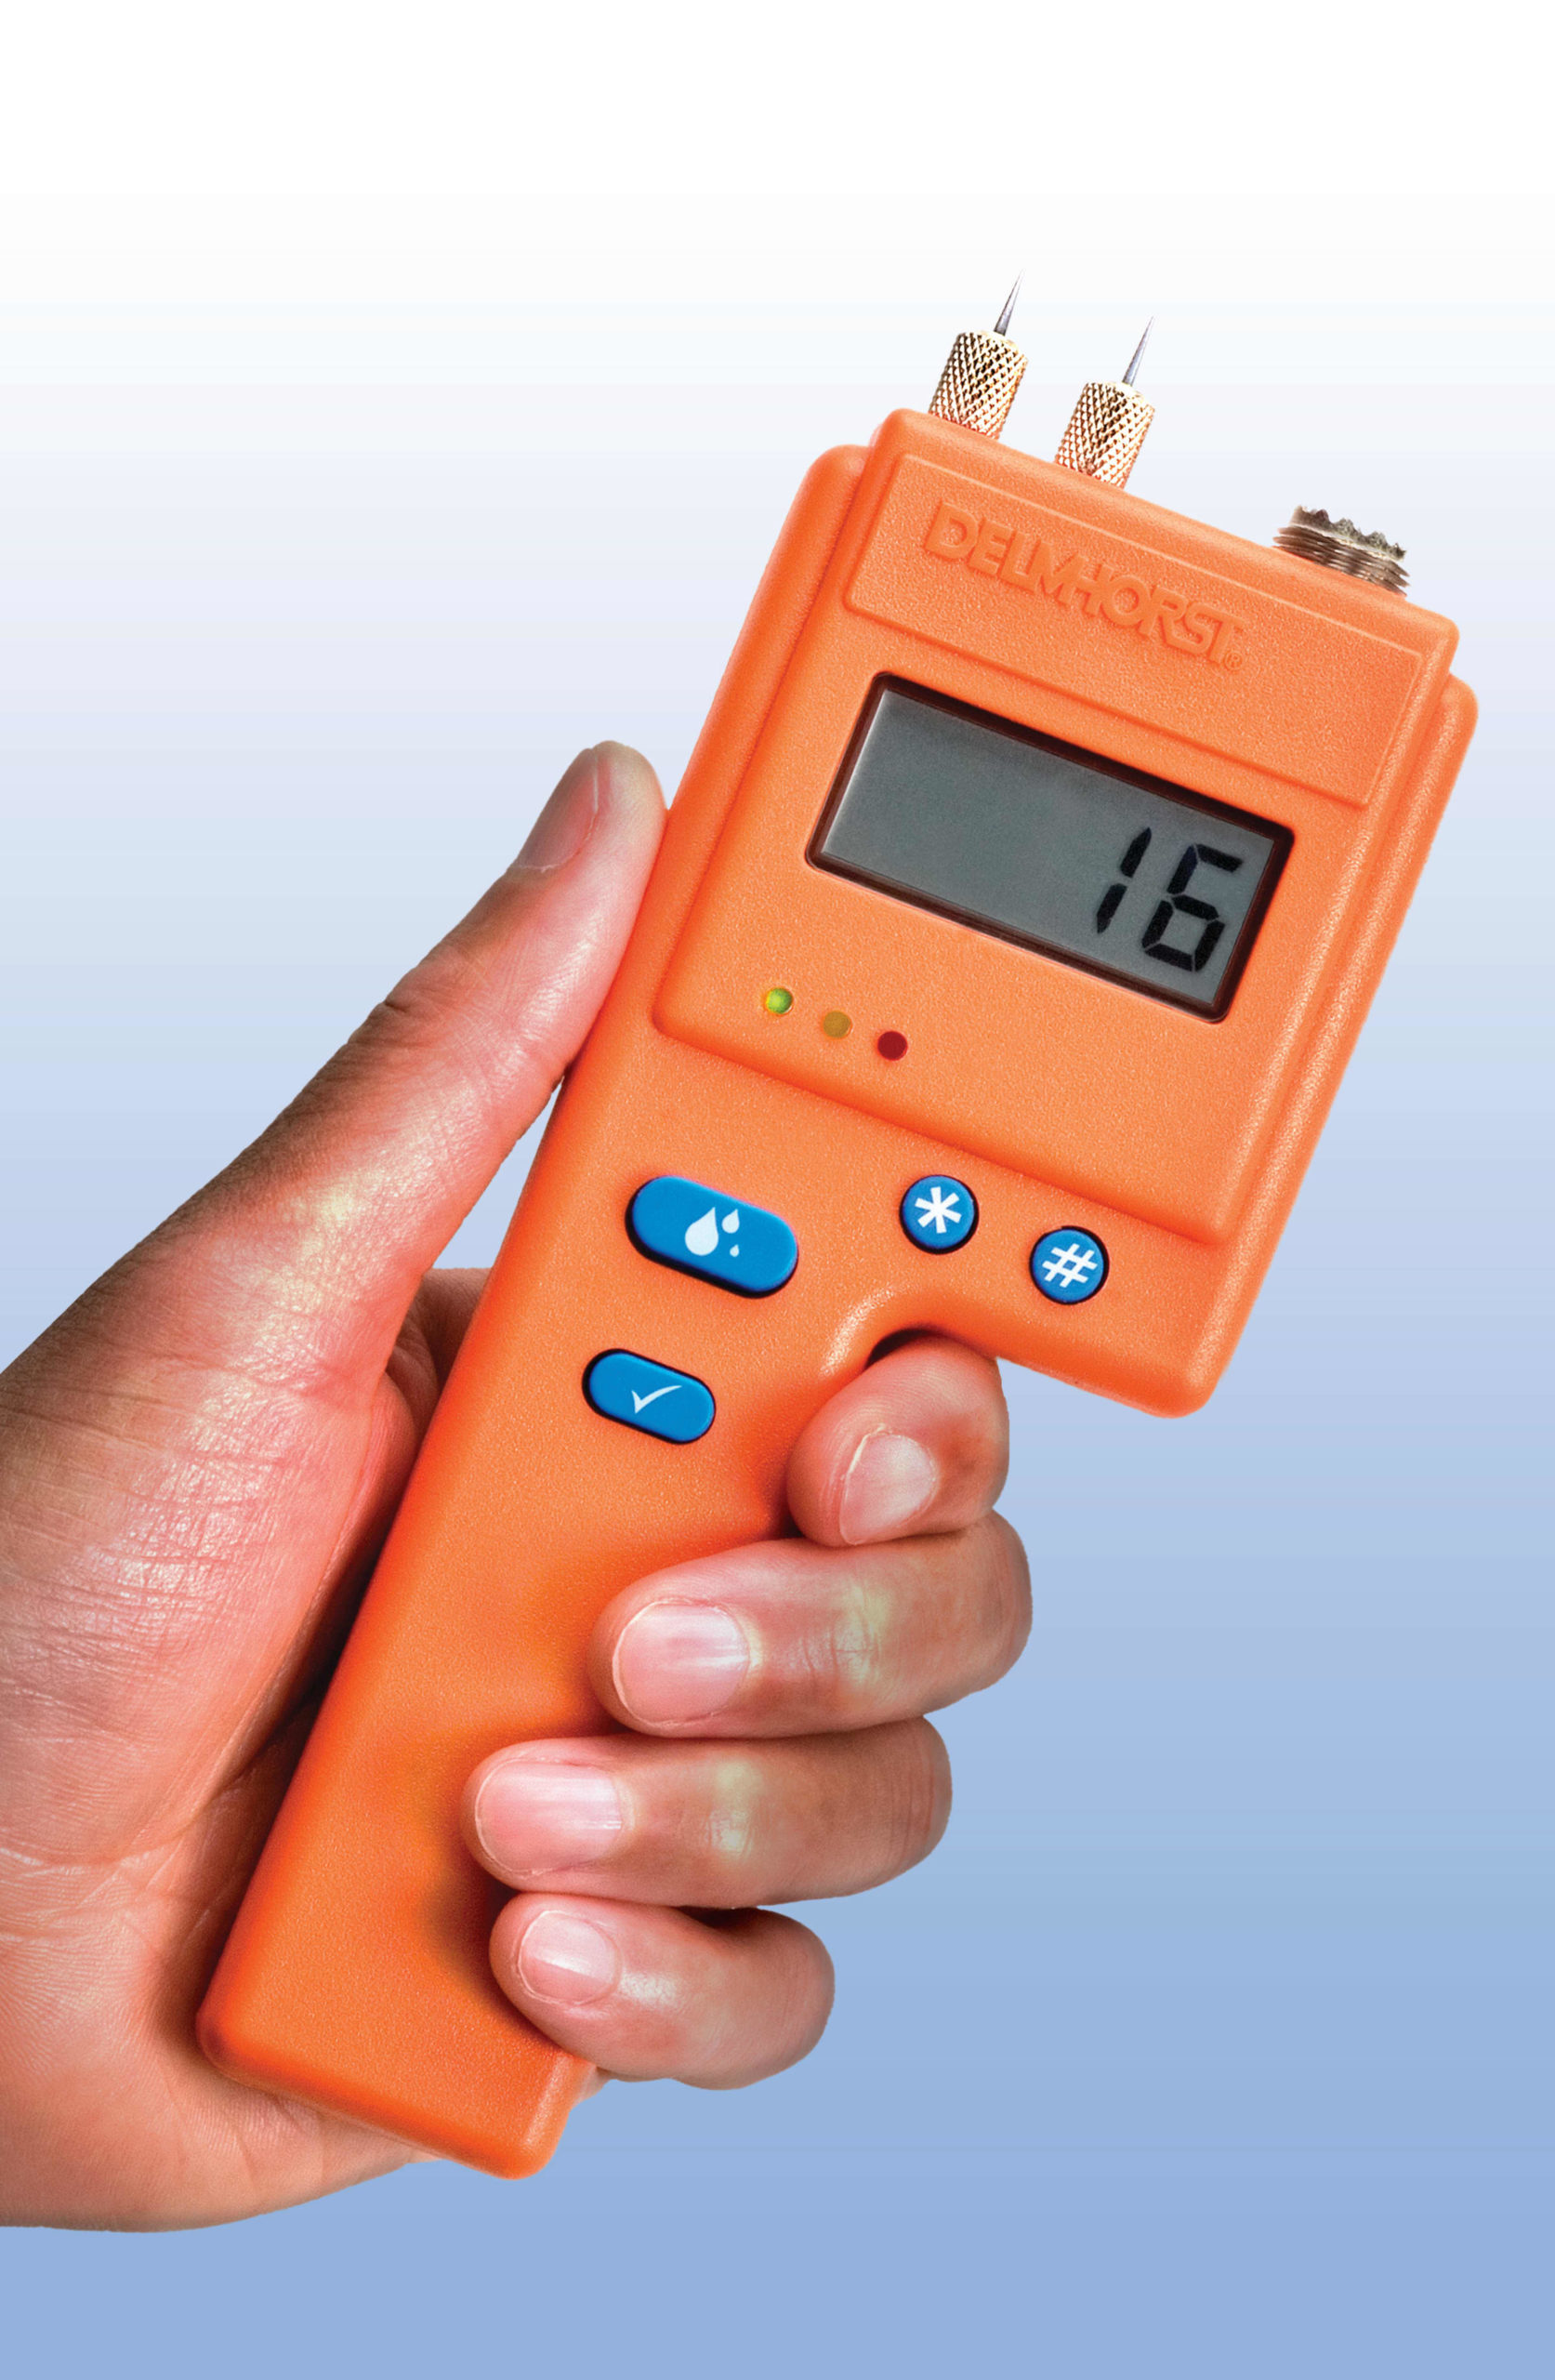 Delmhorst Bd 2100 Penetrating Moisture Meter Wcase Nutech Cleaning